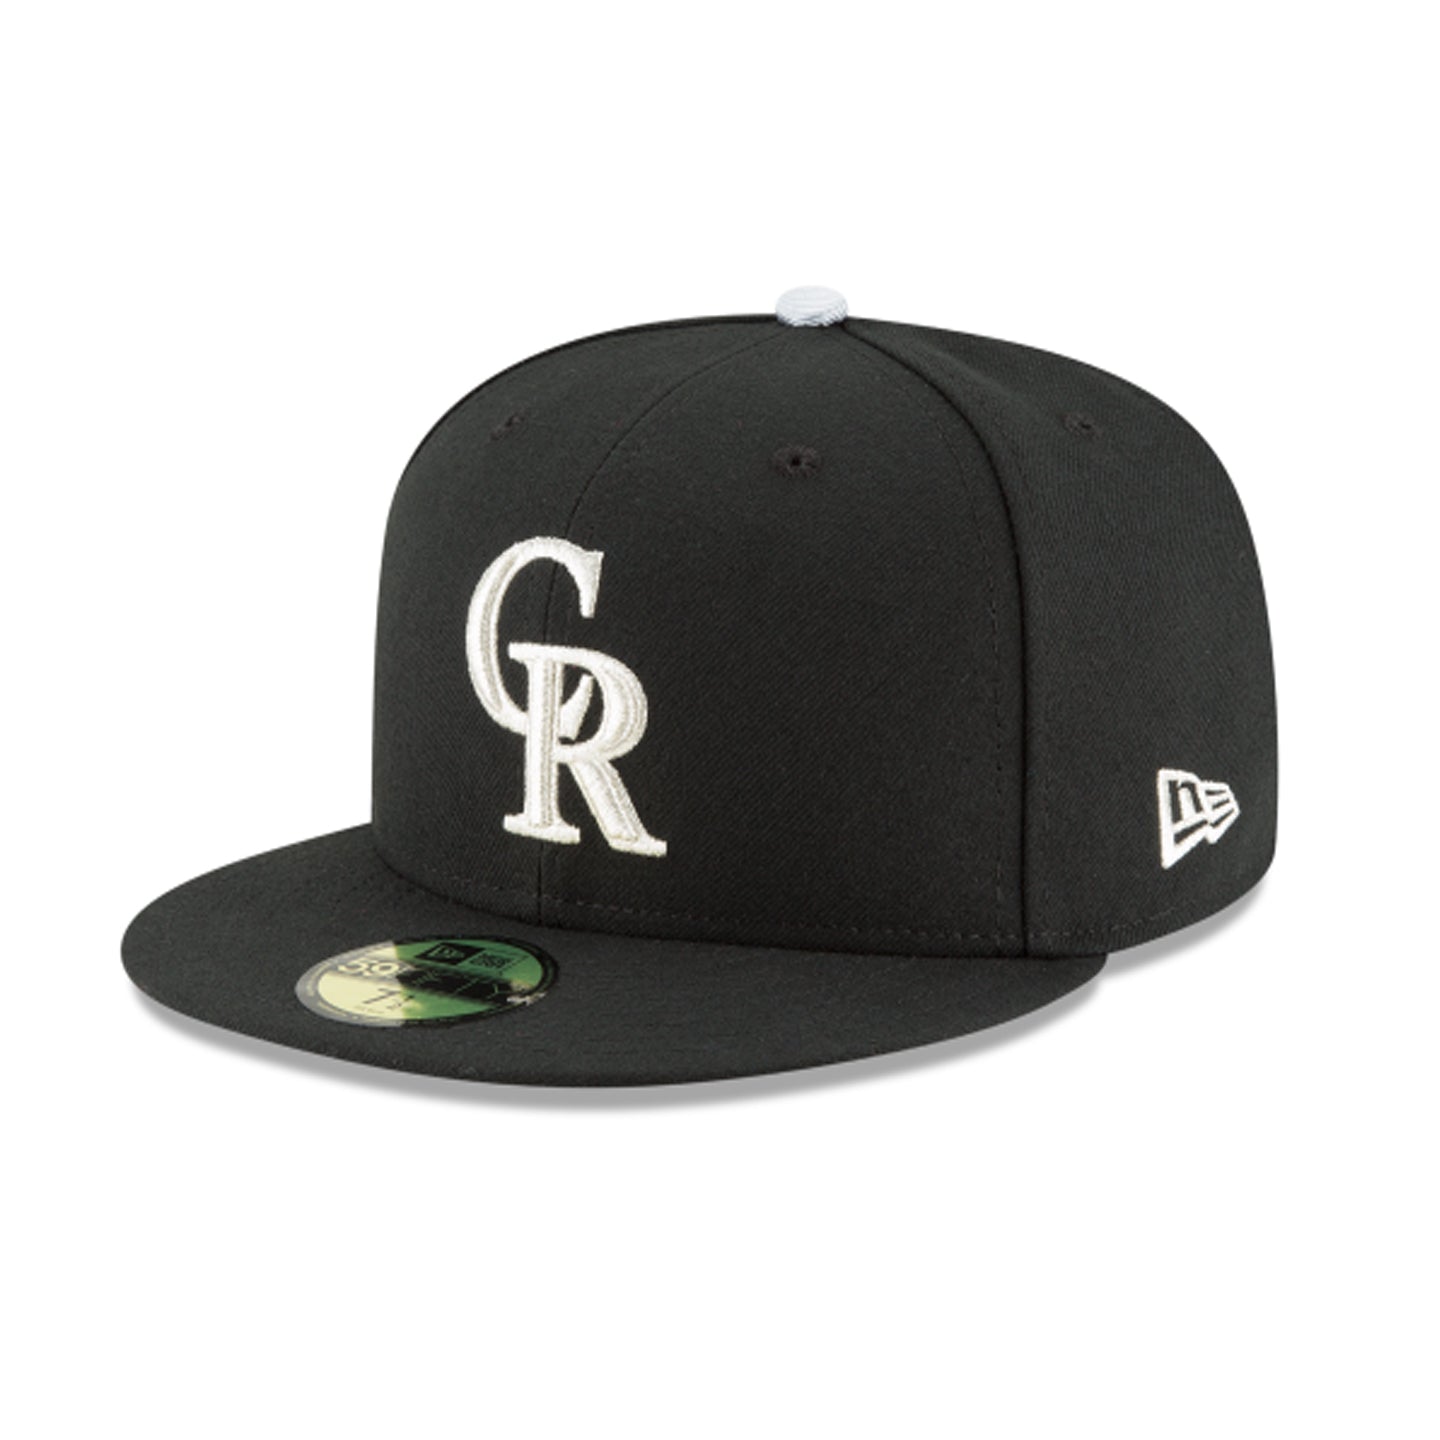 Men's New Era Royal Colorado Rockies Logo White 59FIFTY Fitted Hat